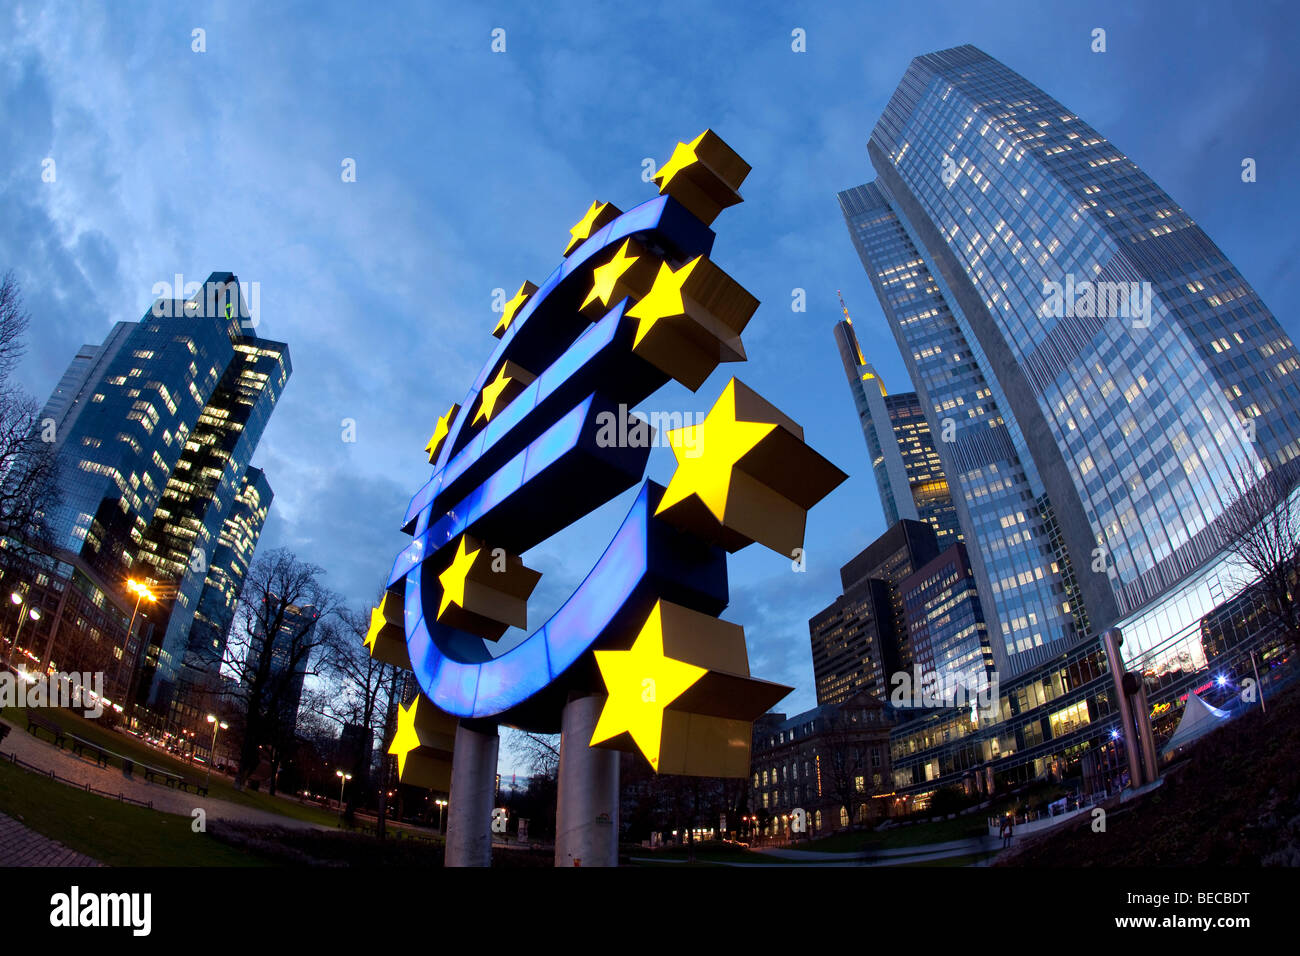 European Central Bank, right, with the euro symbol and Dresdner Bank, left, in Frankfurt am Main, Hesse, Germany, Europe Stock Photo